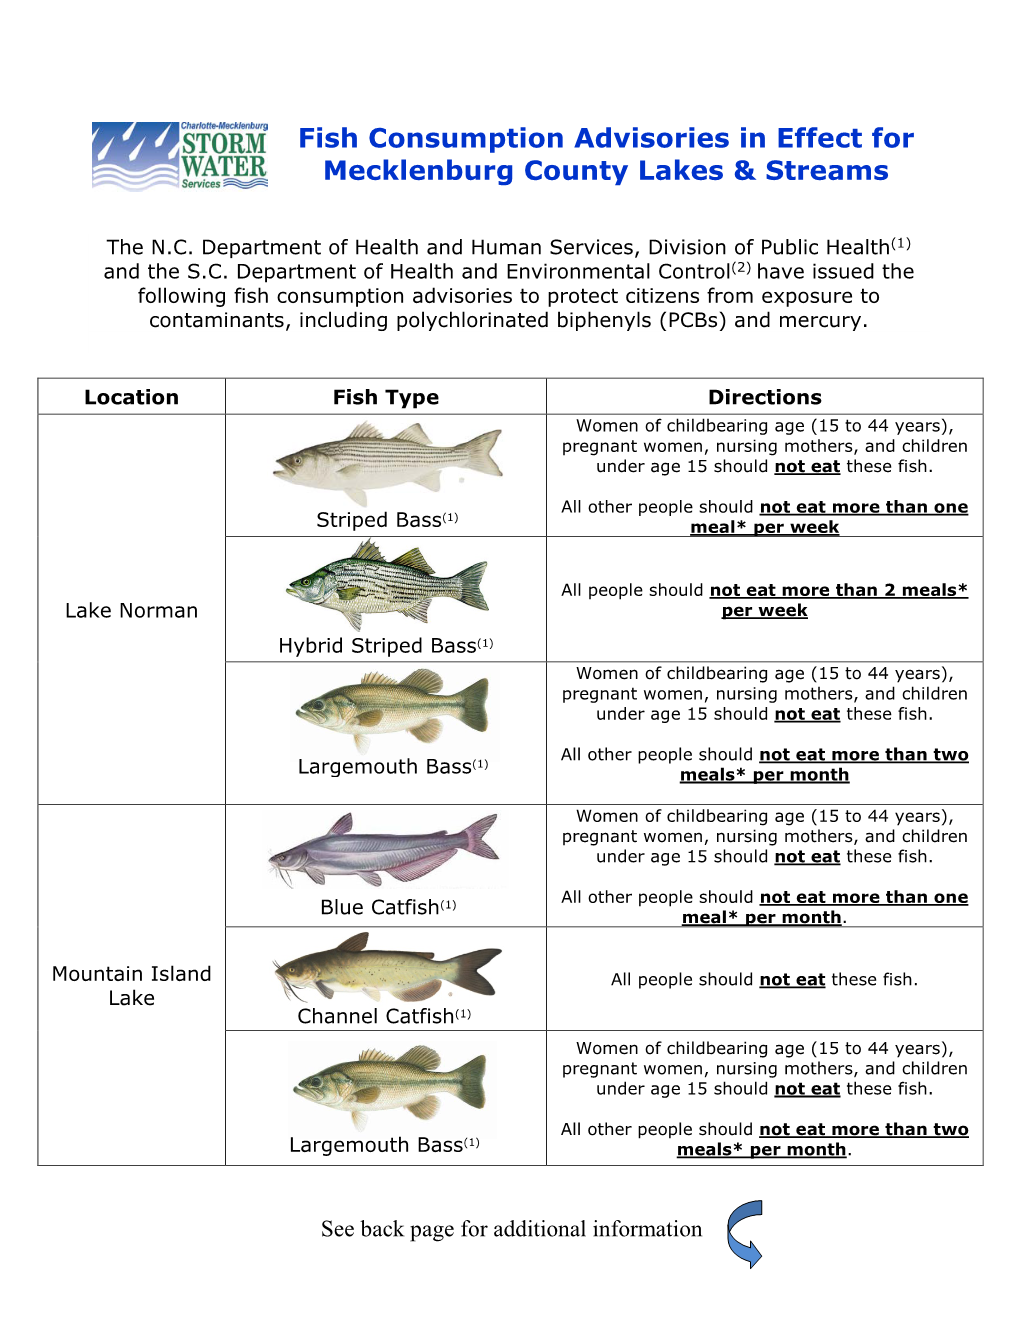 Fish Consumption Advisories in Effect for Mecklenburg County Lakes & Streams